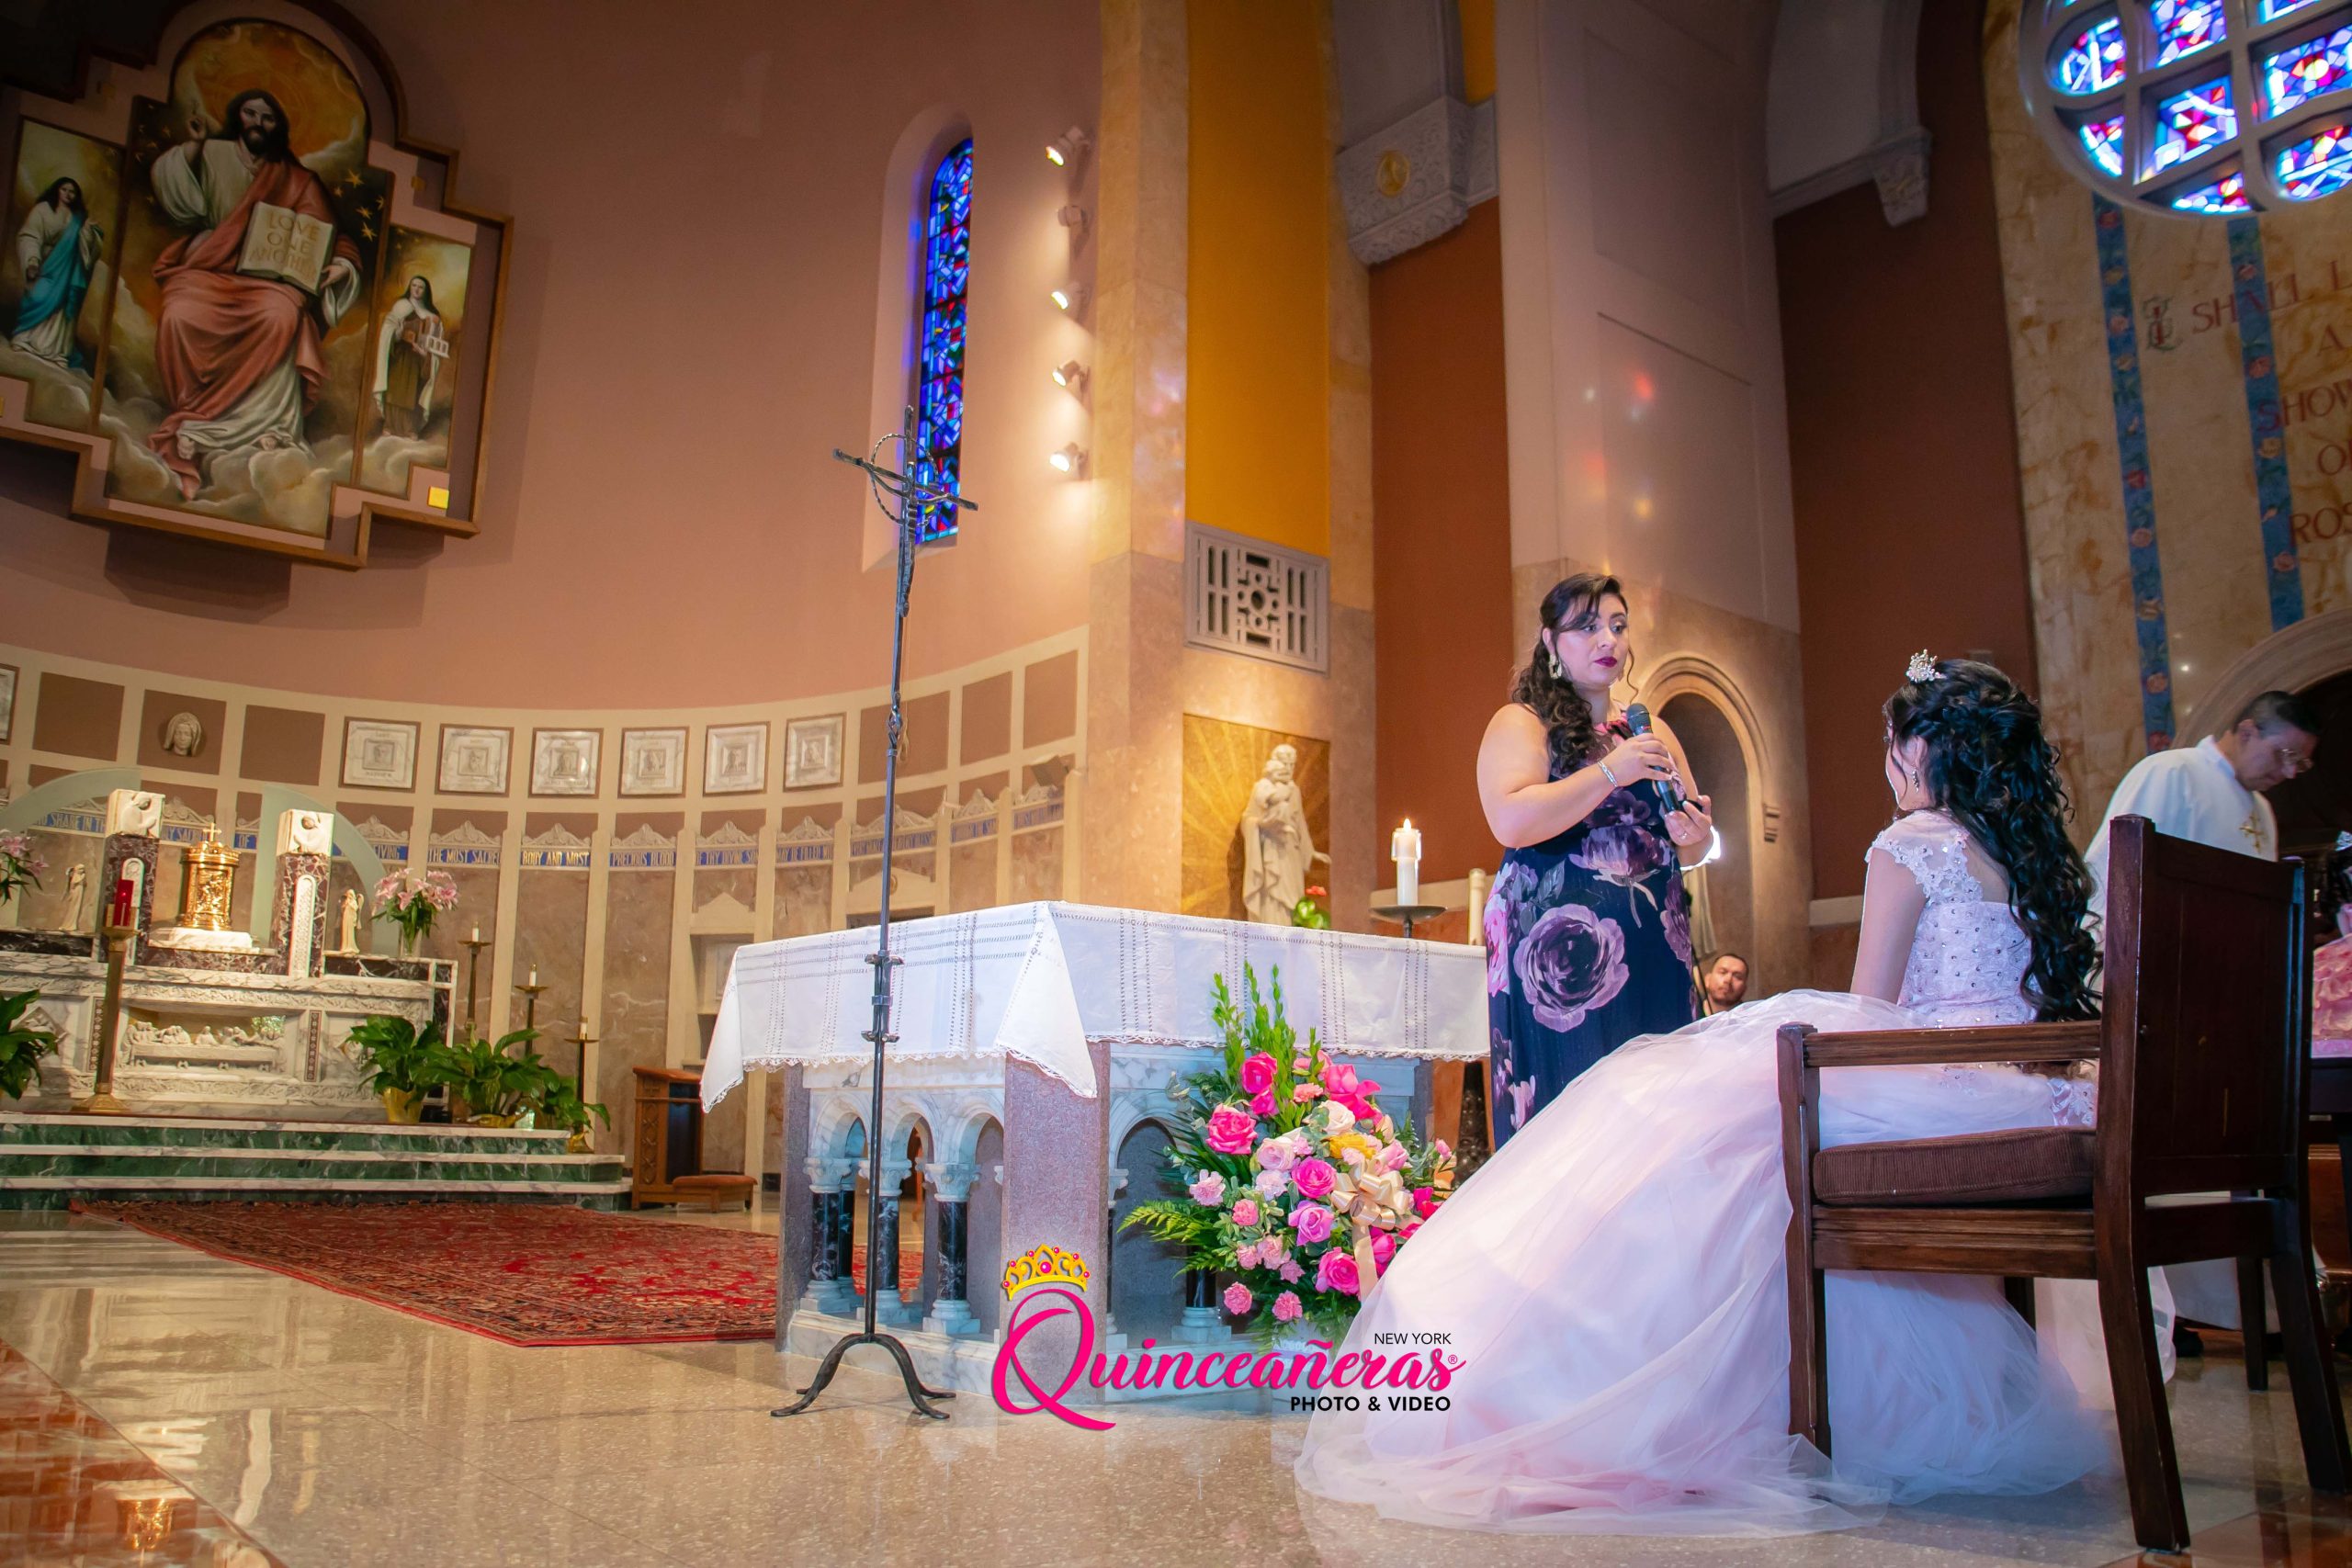 Planning a Quinceanera or Sweet 16 Ceremony in New York?